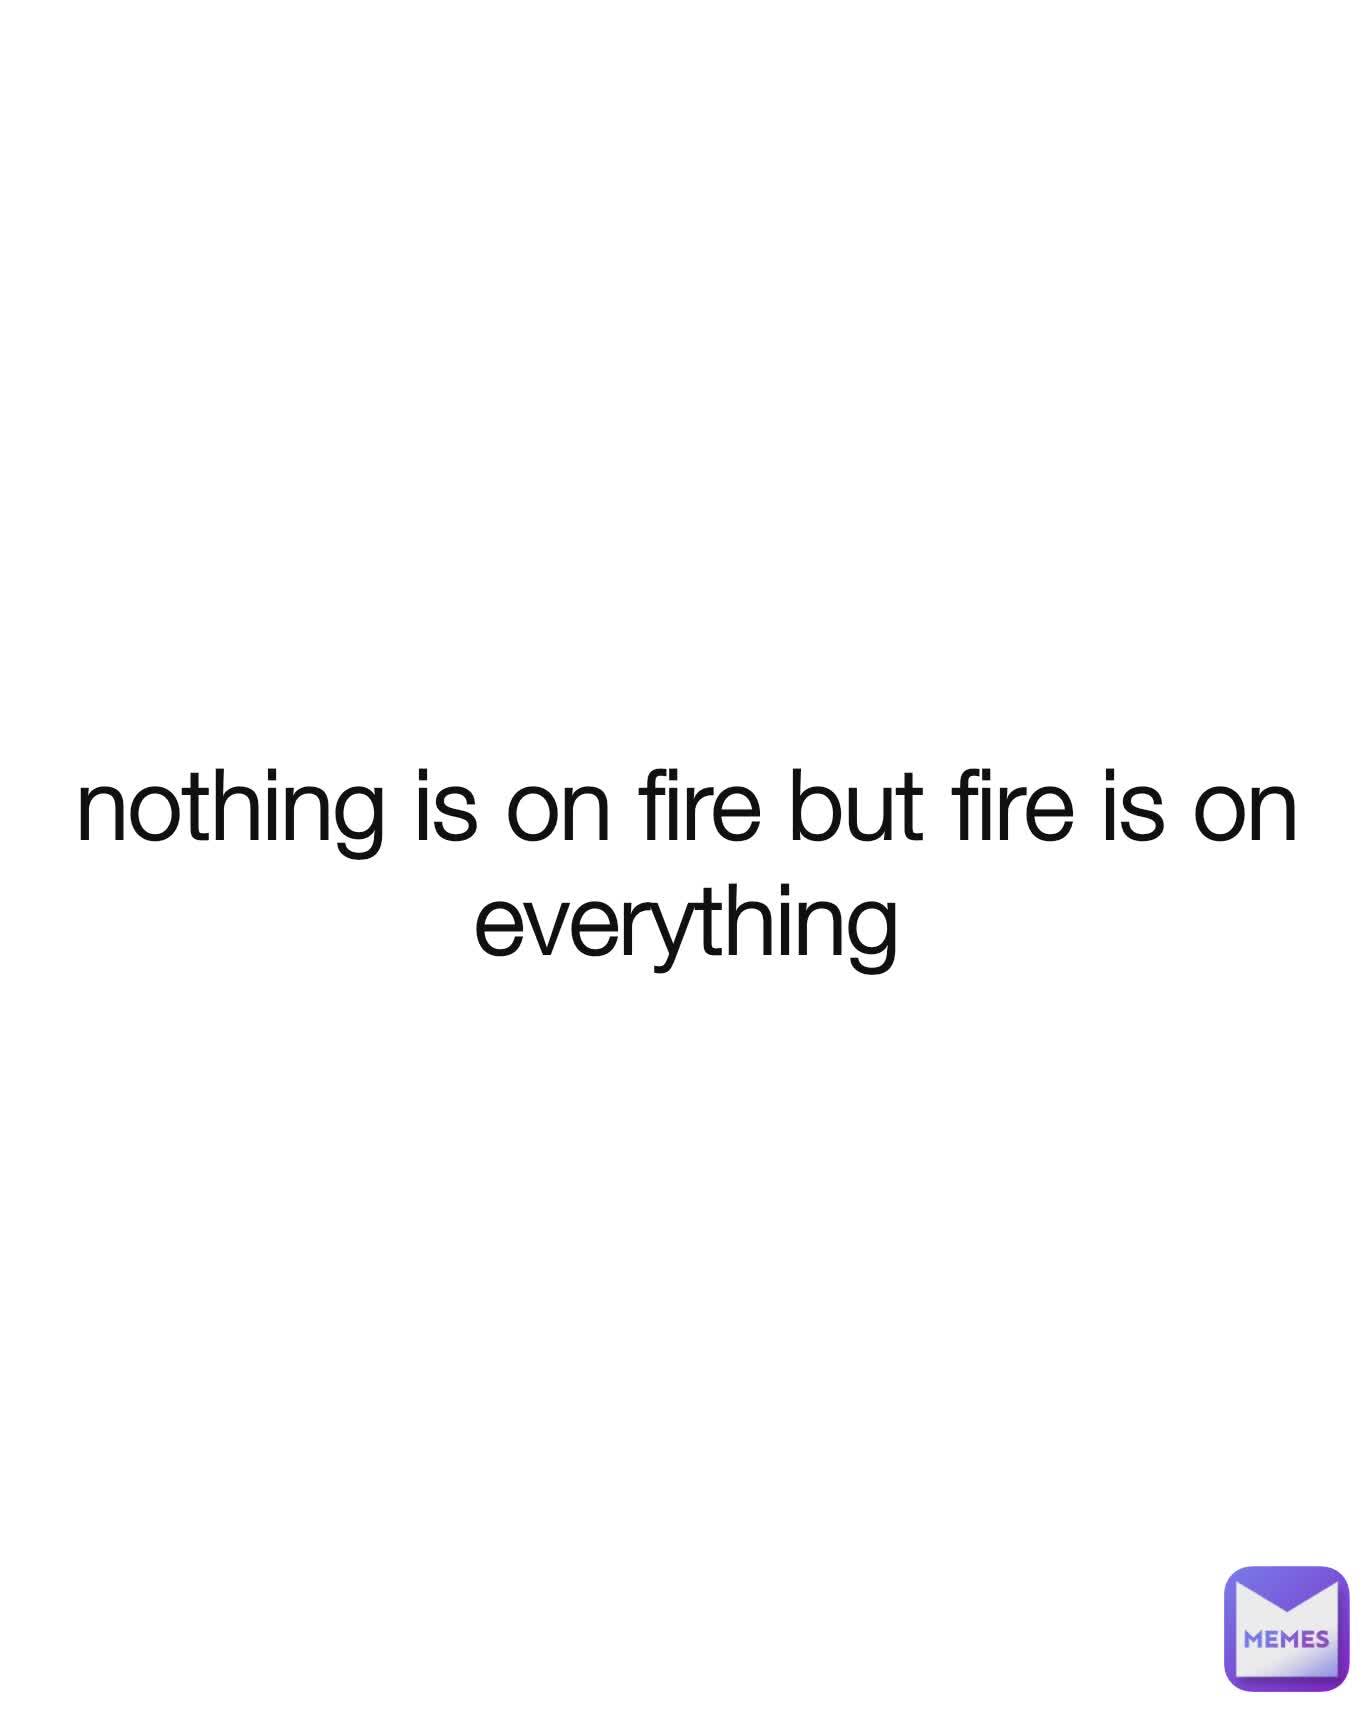 nothing is on fire but fire is on everything